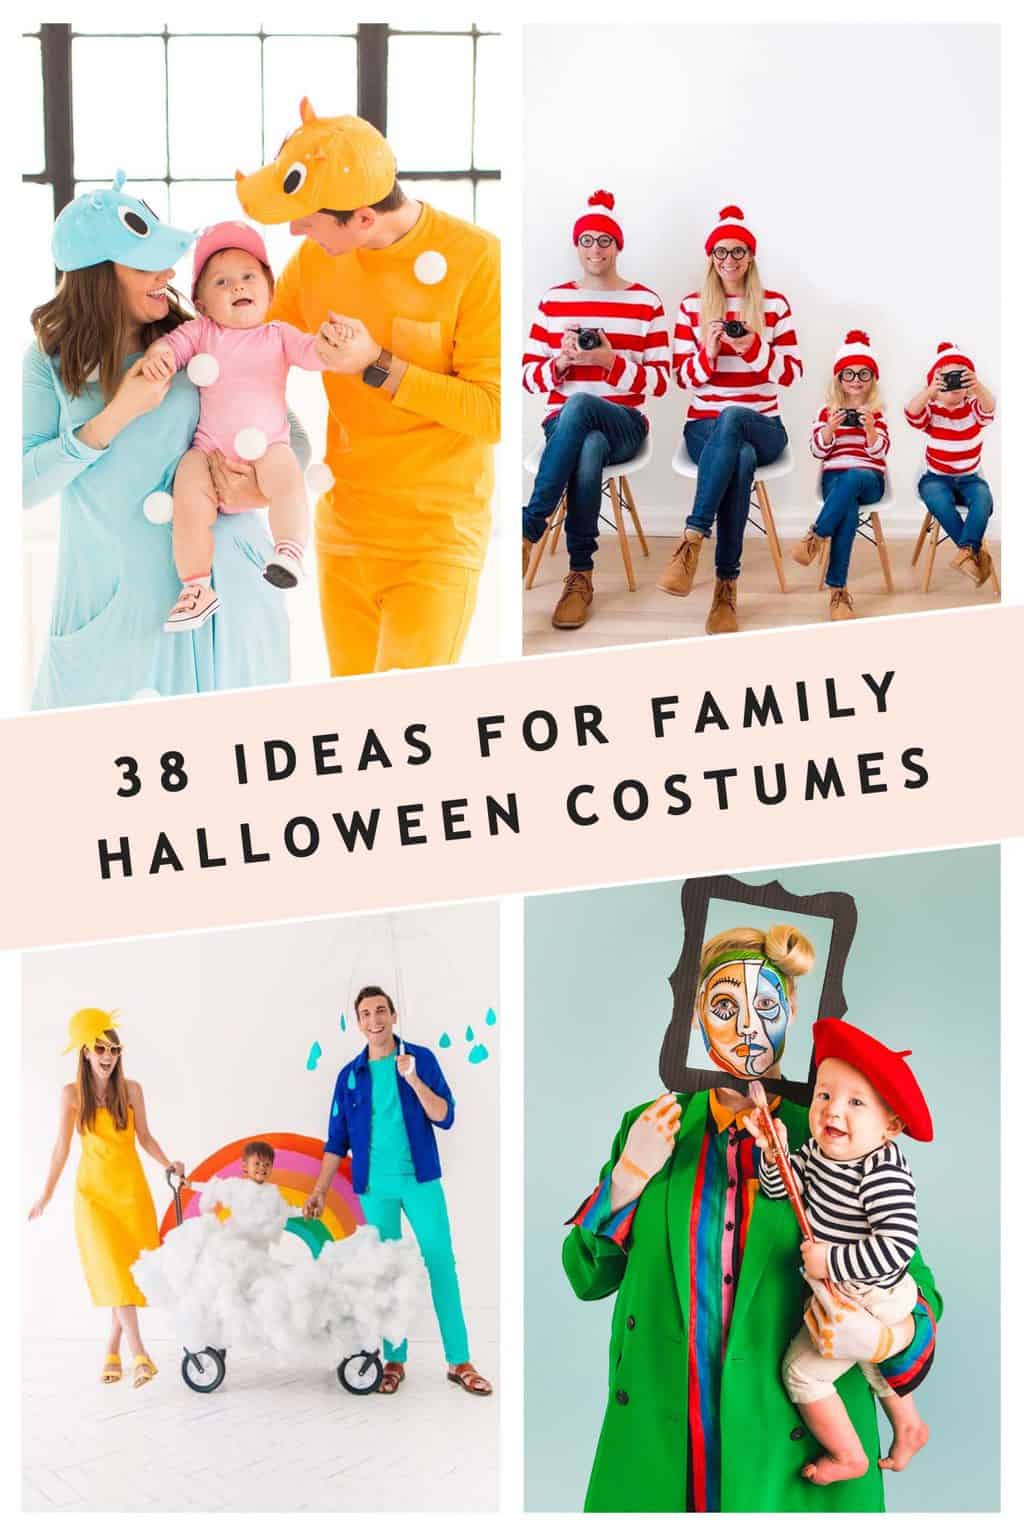 a photo collage of 4 family costume ideas